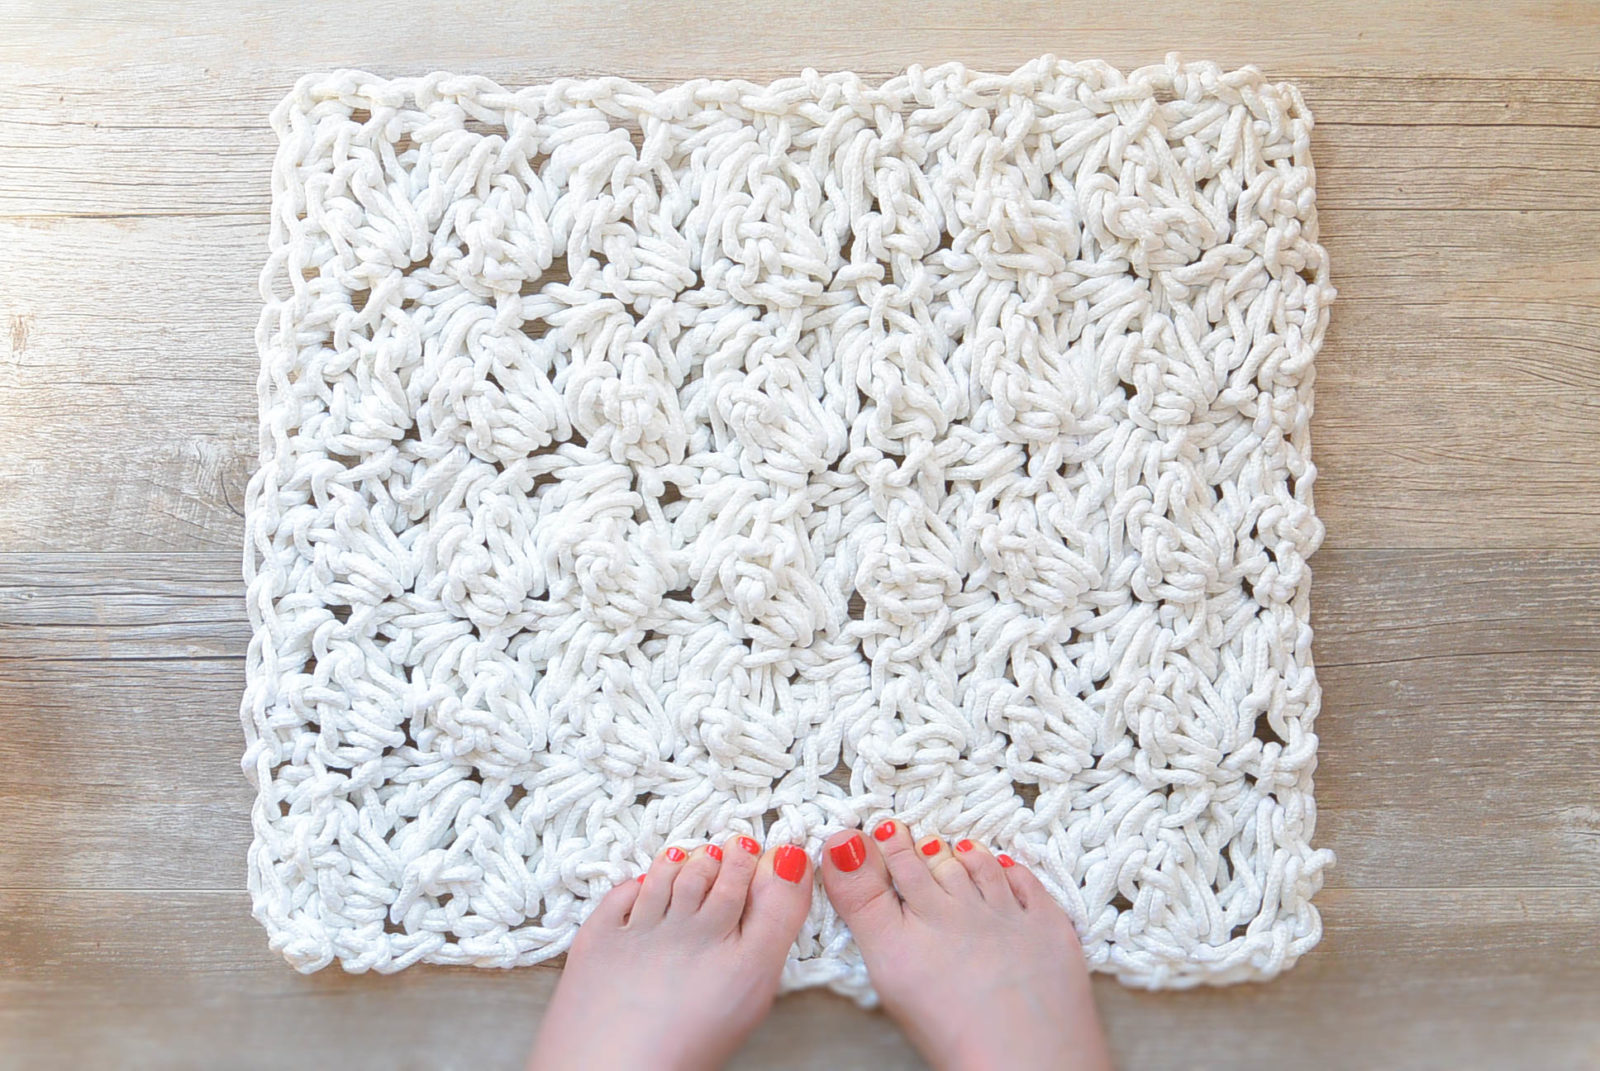 https://www.mamainastitch.com/wp-content/uploads/2016/05/How-to-Crochet-A-Rug-with-Cloths-Line.jpg